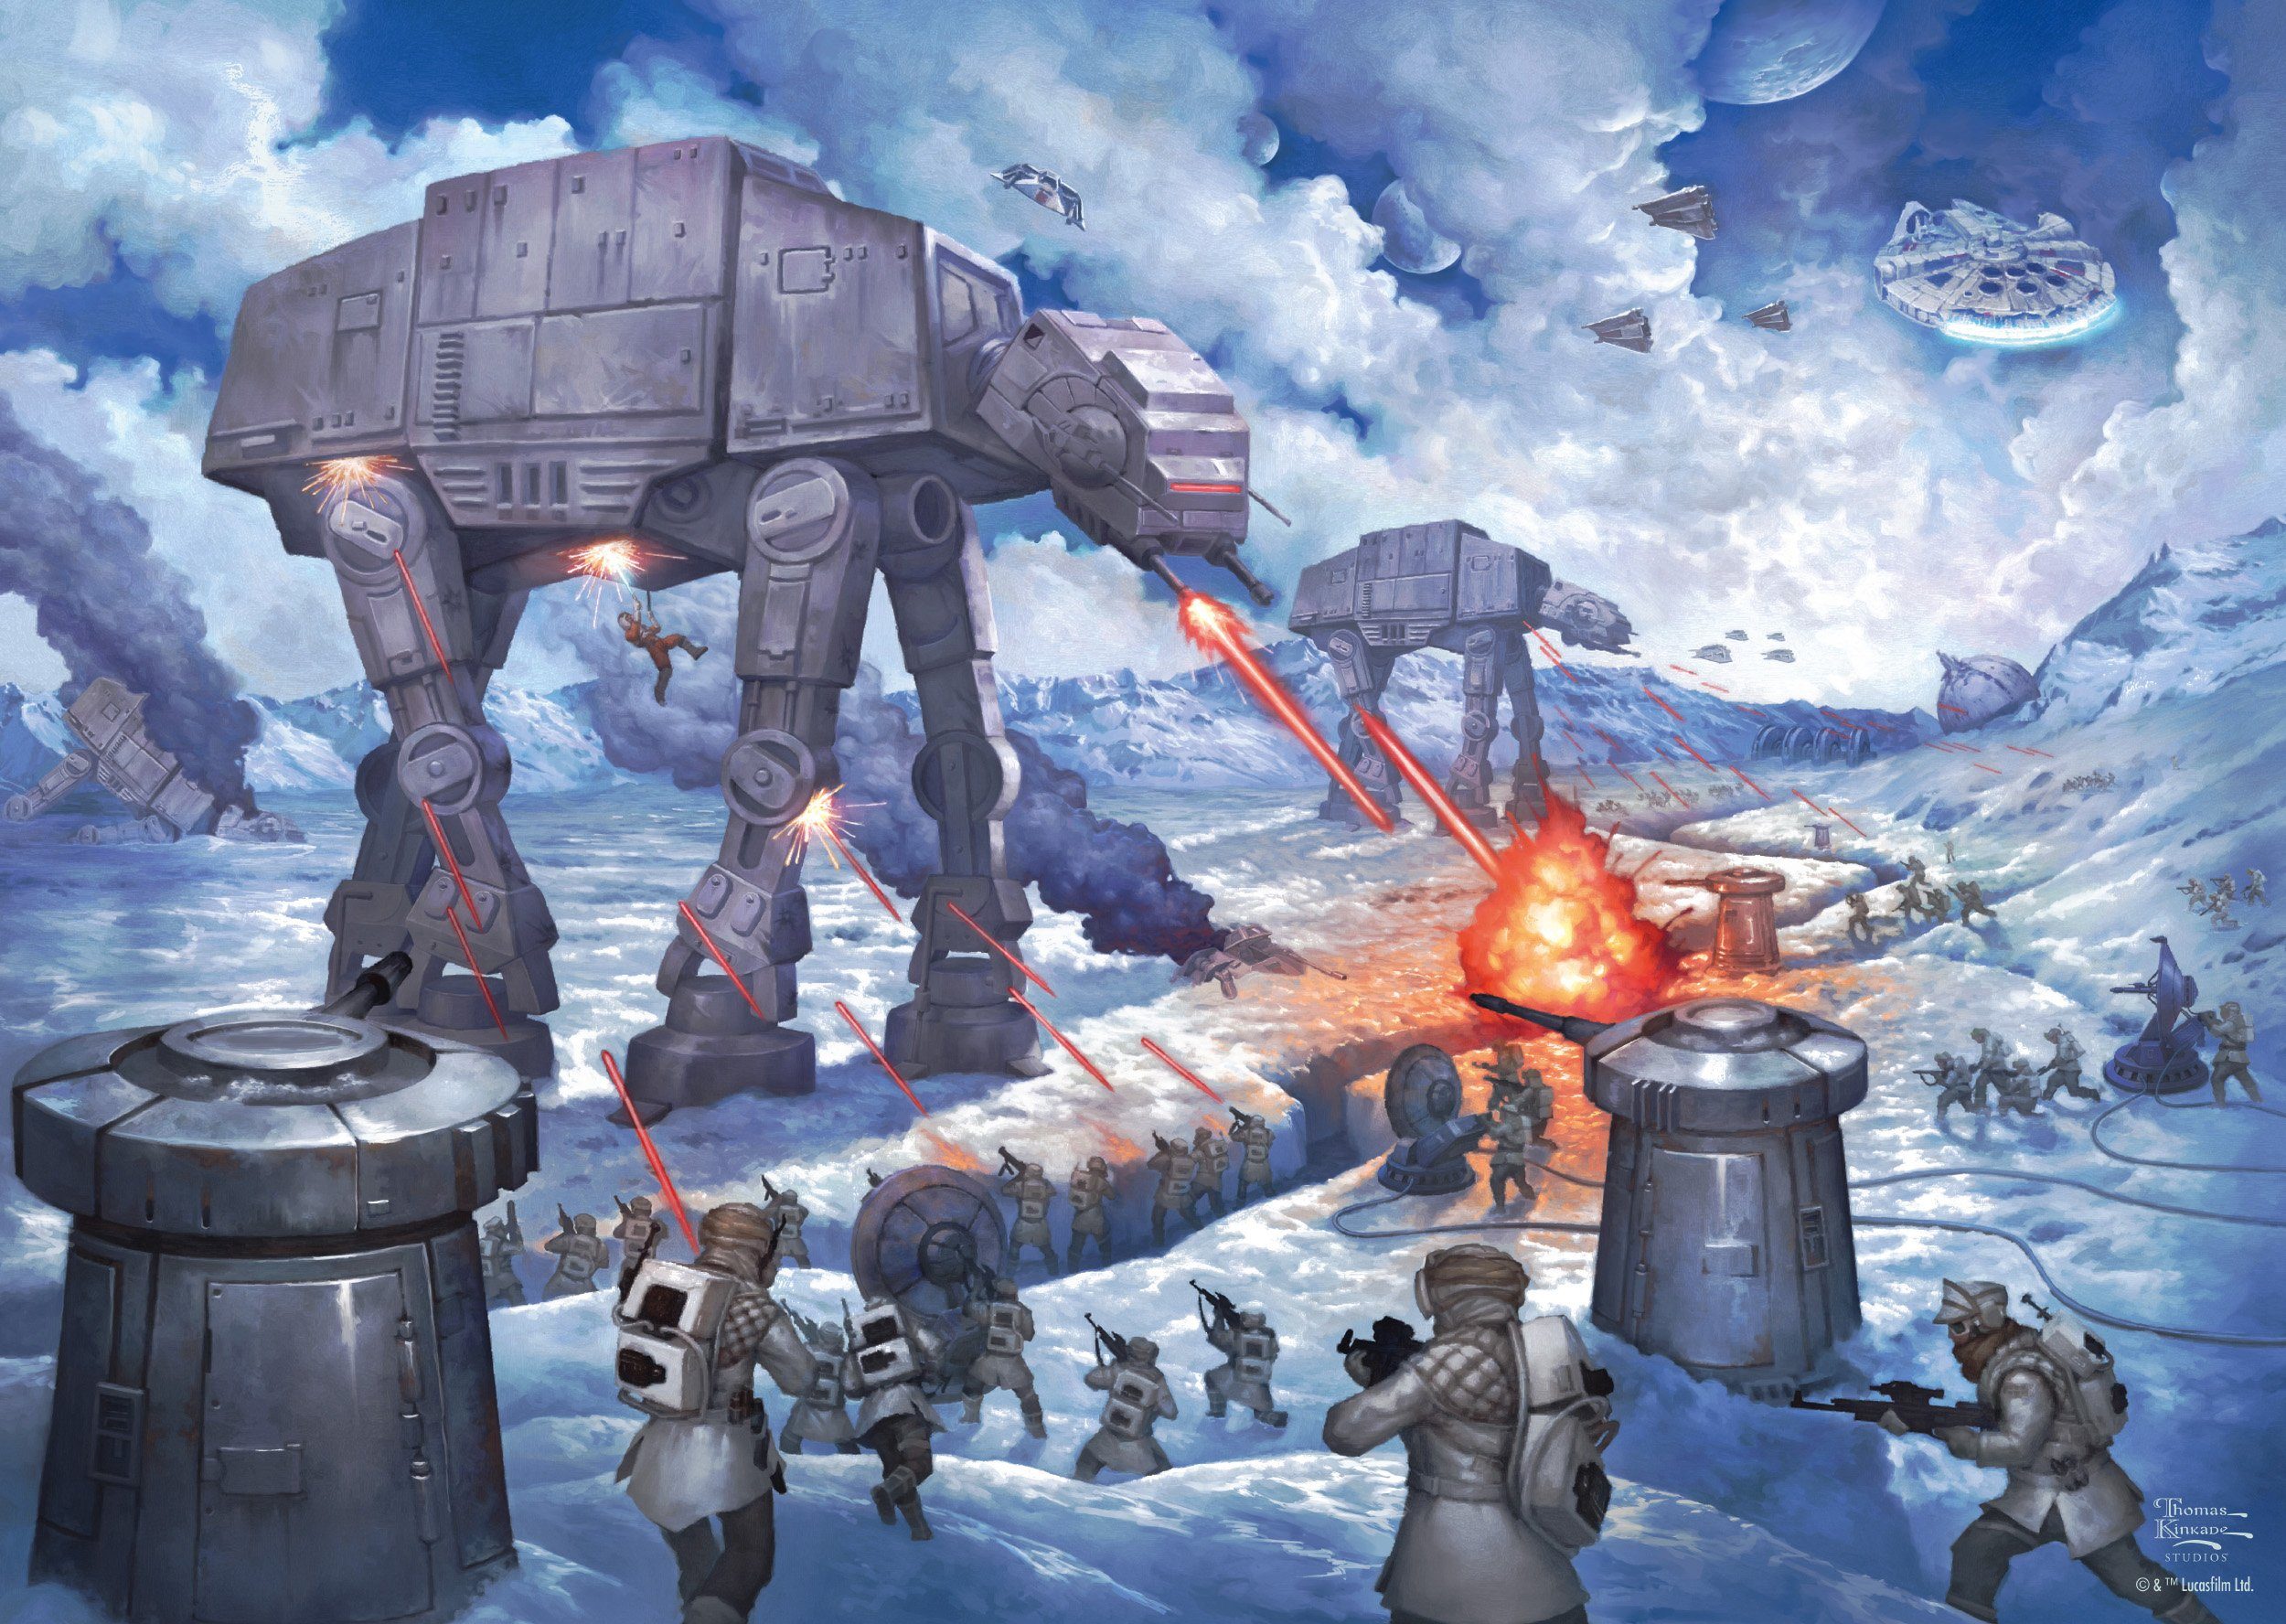 The Europe Made Puzzle 1000 Spiele Schmidt Puzzleteile, in Battle of Hoth,